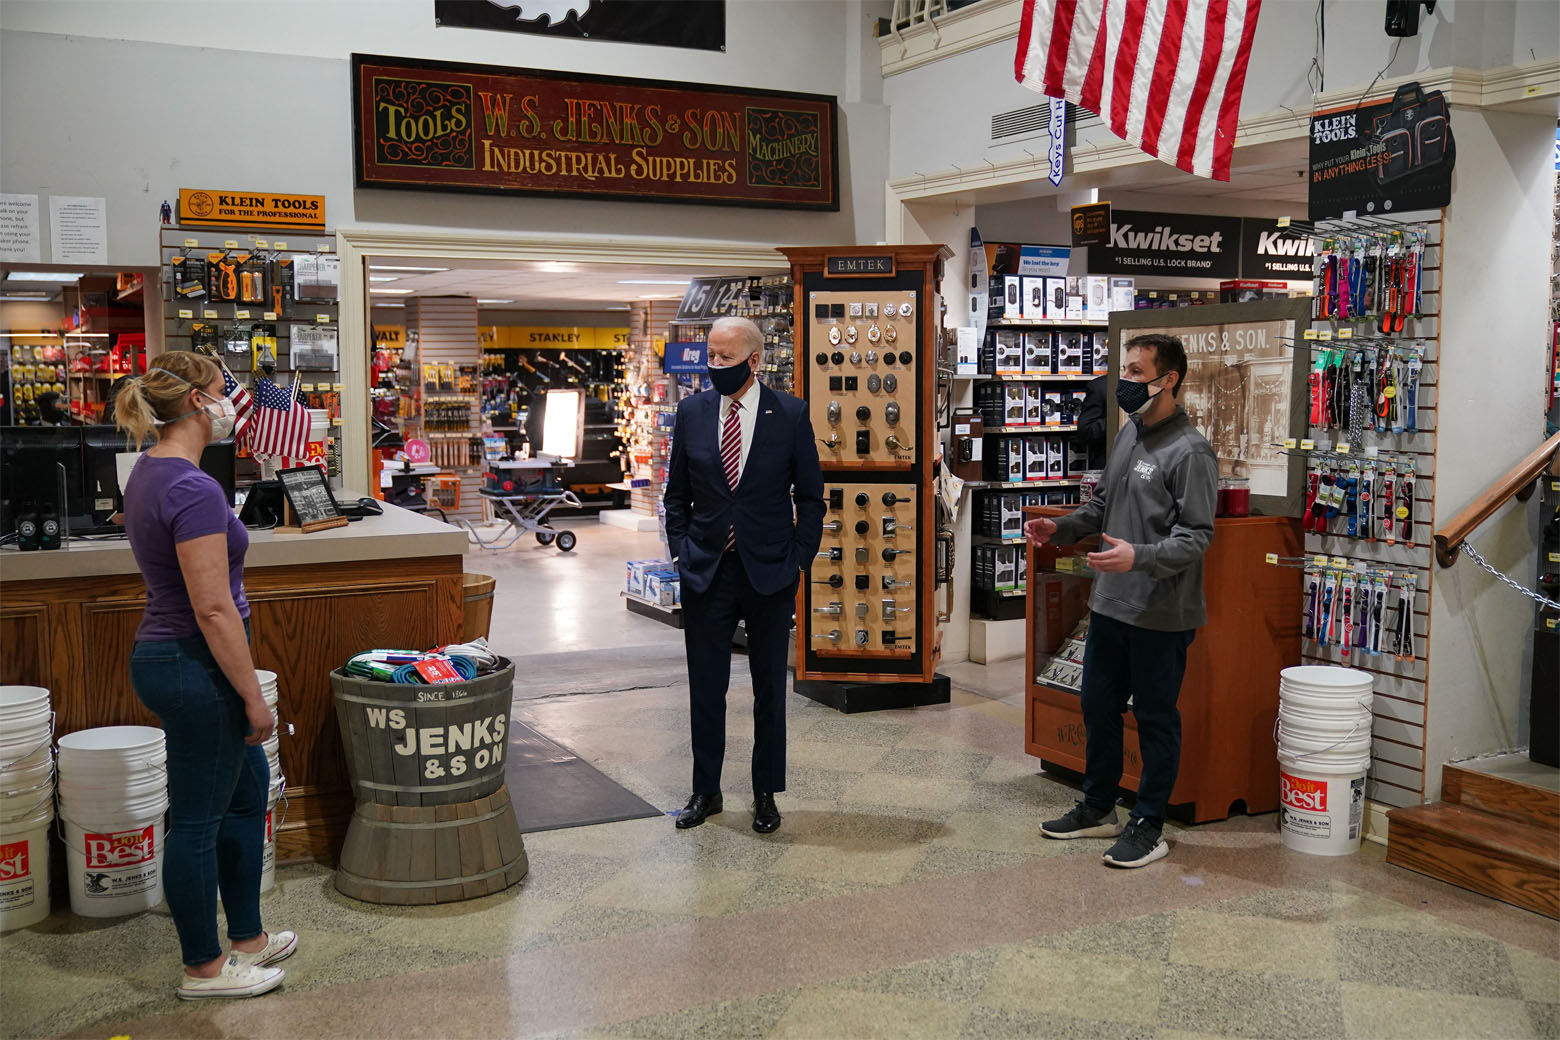 <p>US President Joe Biden (C) visits W.S. Jenks &amp; Son, a hardware store that has benefited from a Paycheck Protection Program (PPP) loan, in Washington, DC, on March 9, 2021. — Biden met with Michael Siegel (R), co-owner of W.S. Jenks &amp; Son, and Mary Anna Ackley (L), owner of Little Wild Things Farm, a business next door to Jenks &amp; Son which also benefited from the PPP.</p>
